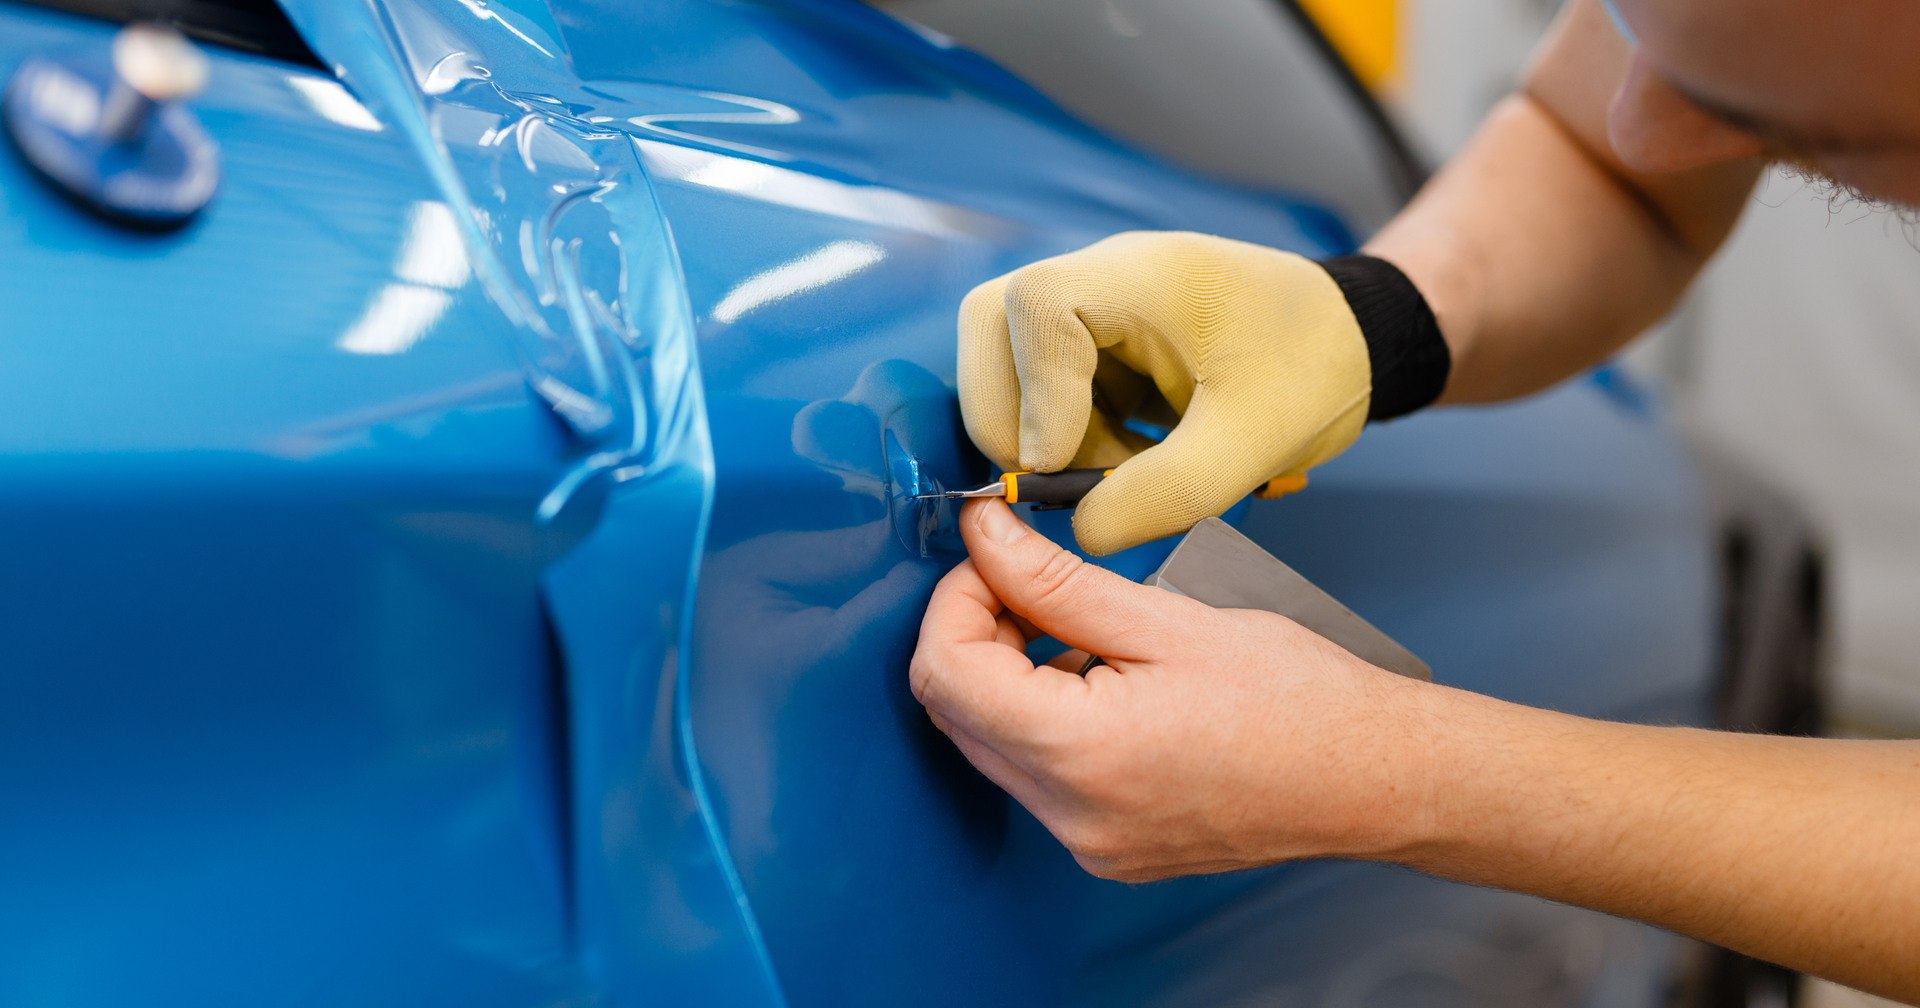 Unleash Your Vehicle's Potential: The Art of Vinyl Transformation